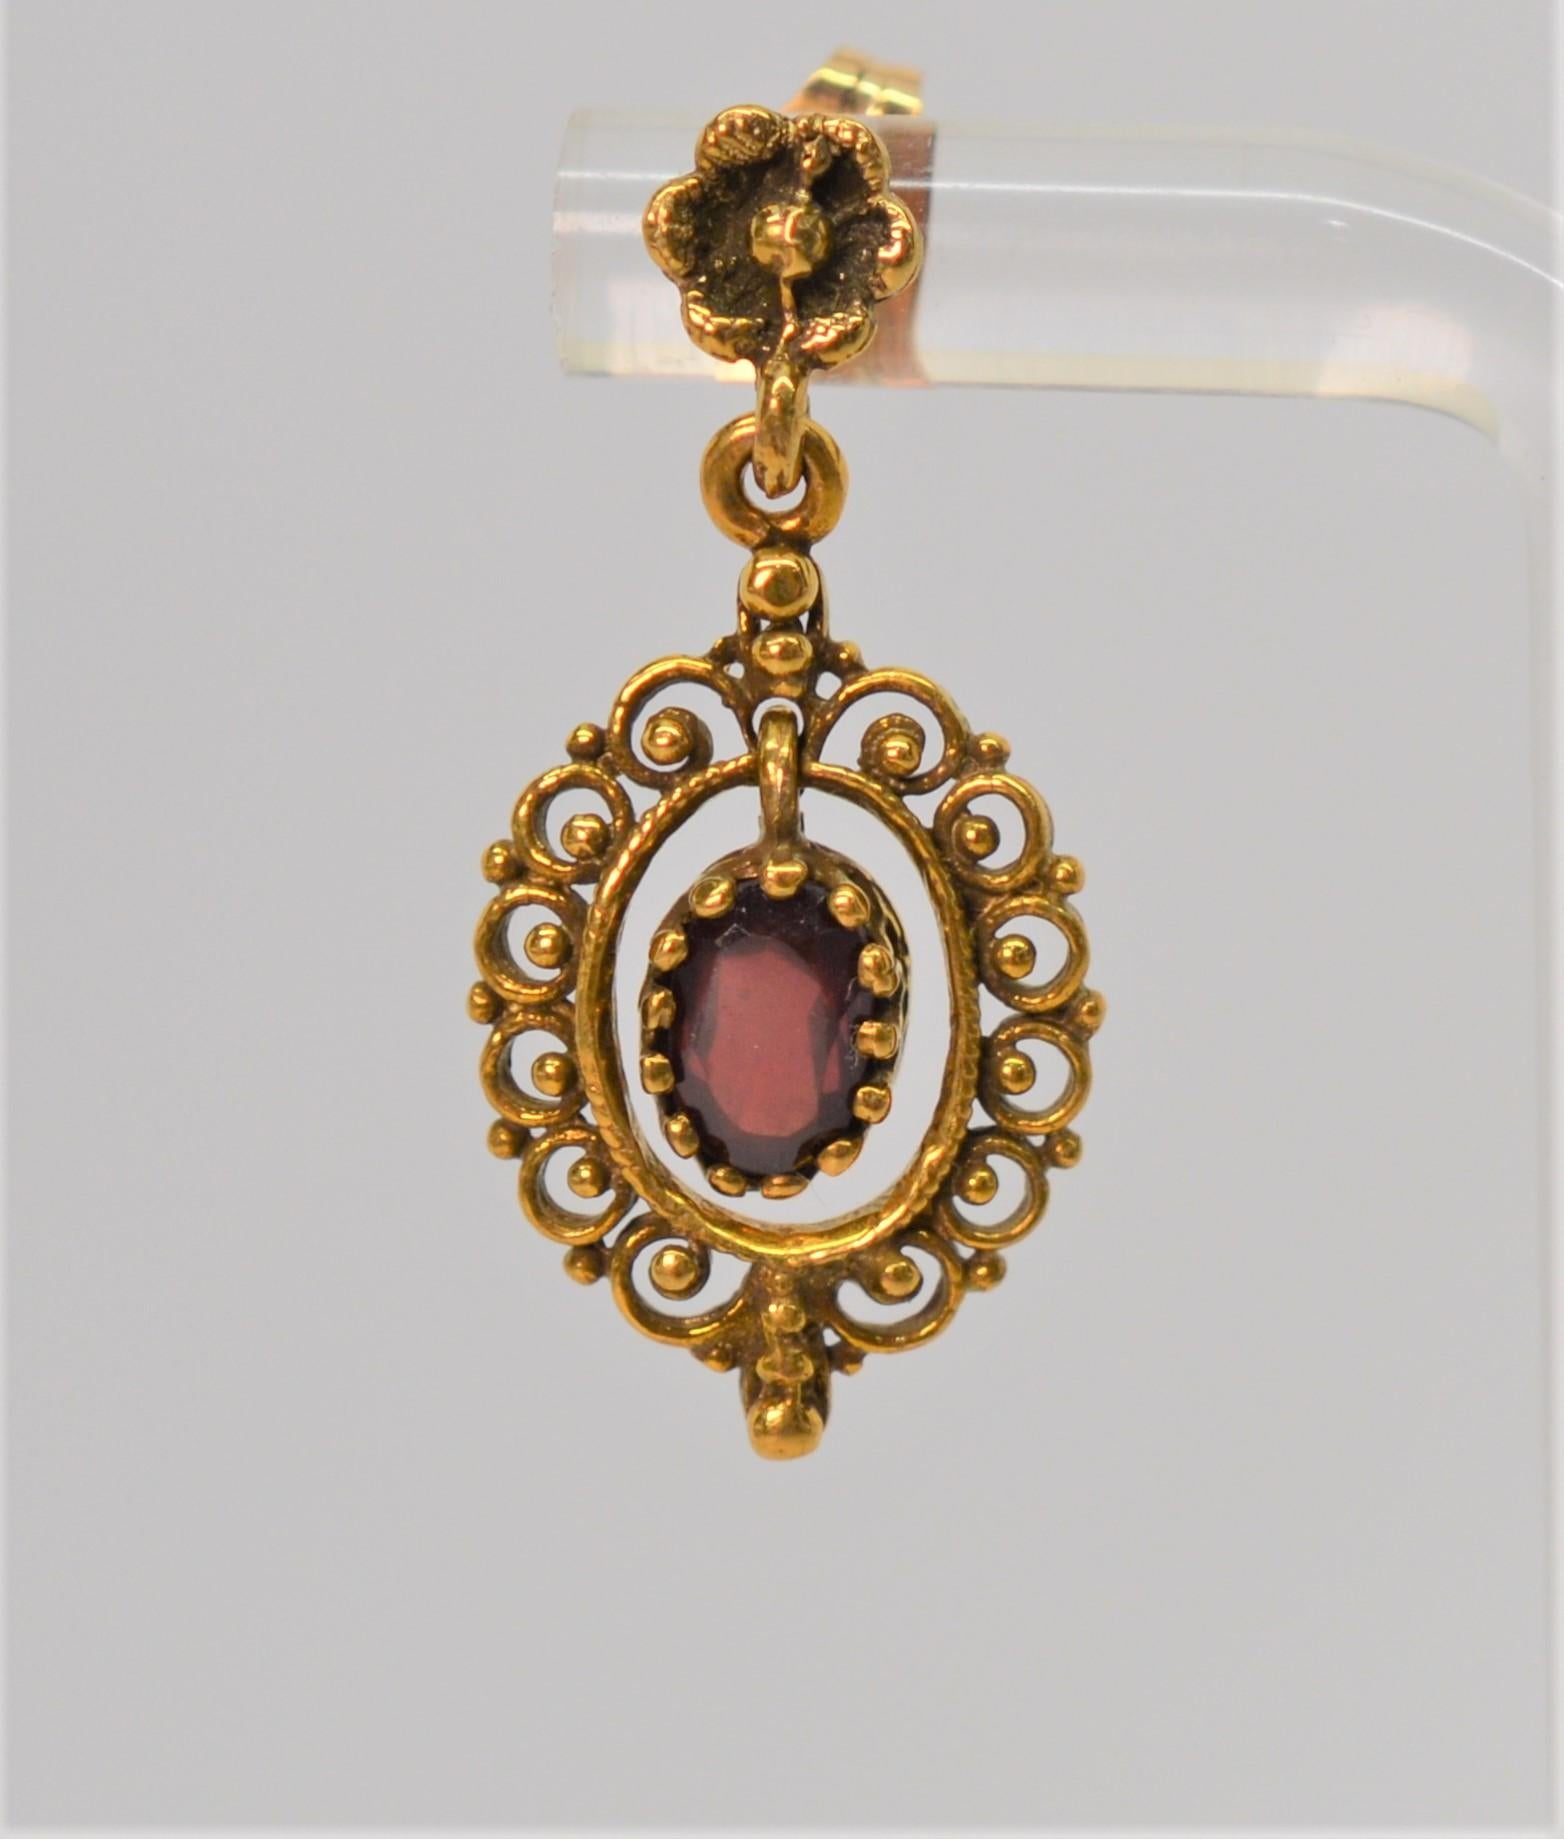 Deep rich red oval garnets in a dainty frame of 14 Karat gold with an antique style patina create this classic dangle earring pair. Post closures for pieced ears, these earrings measure one inch in length from top post to end. In gift box. 